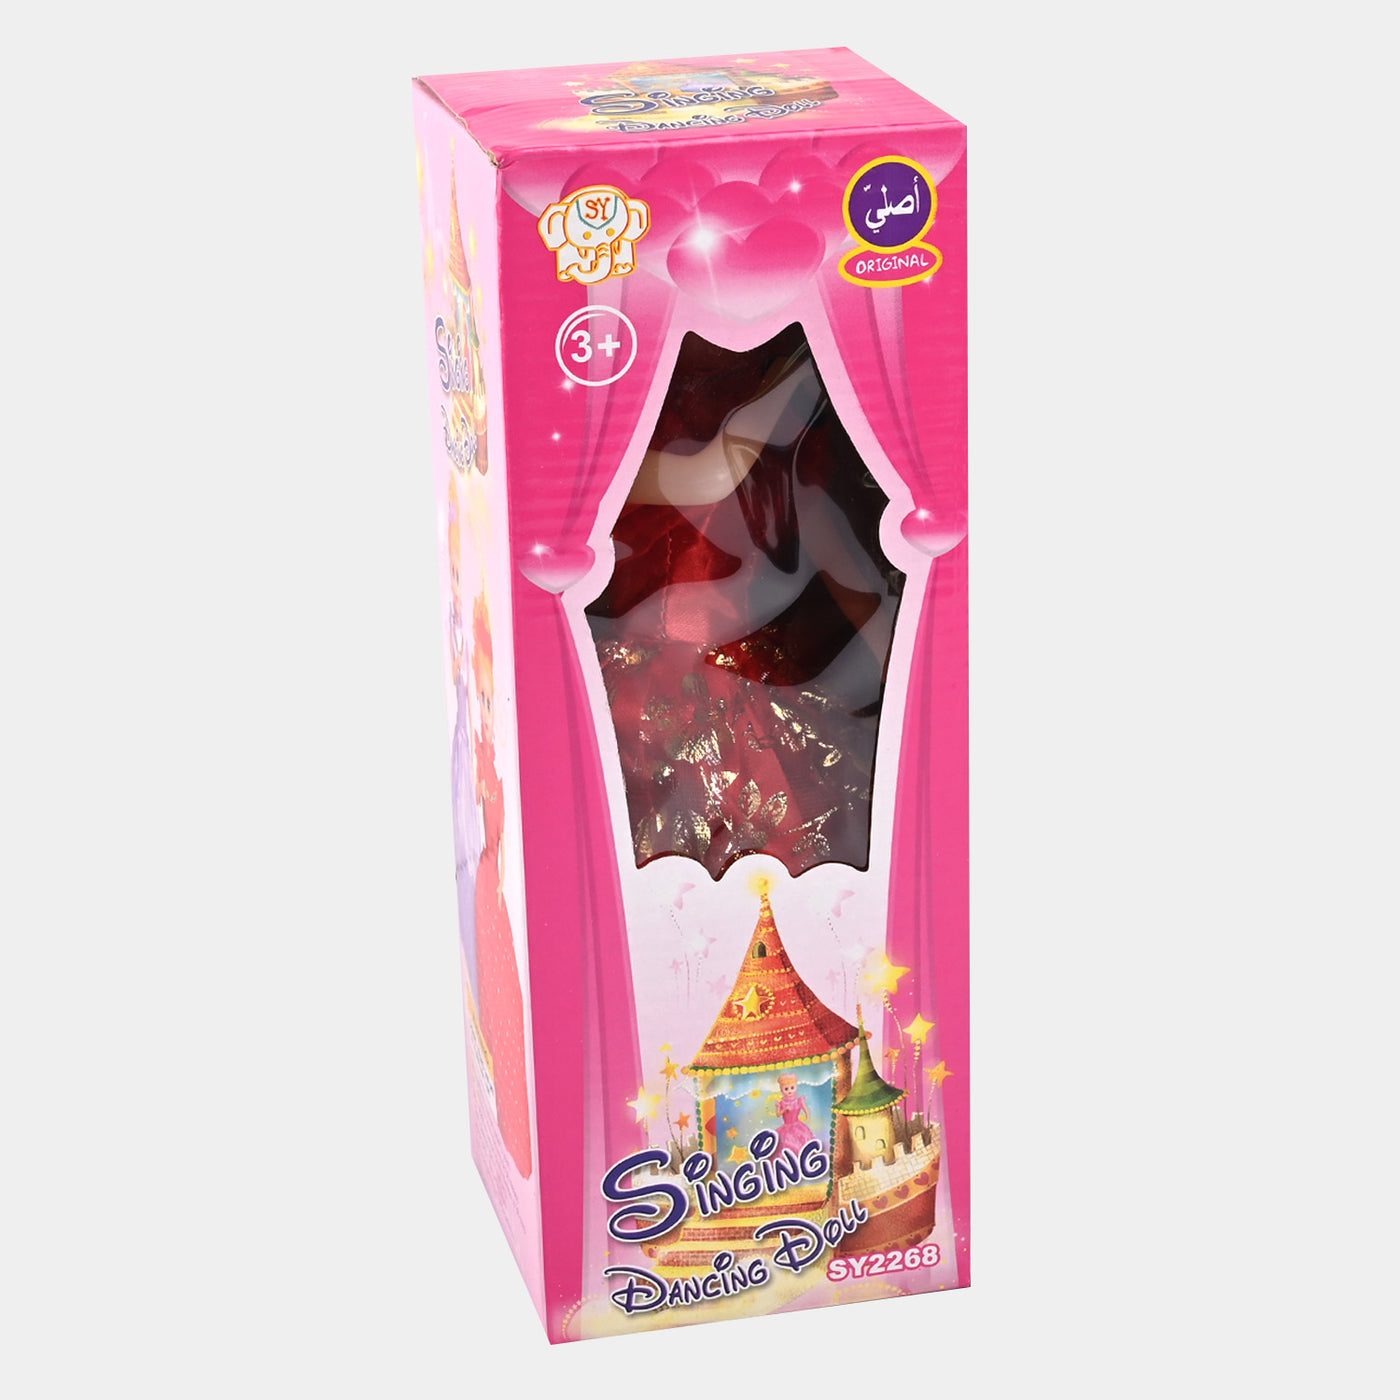 SINGING AND DANCING DOLL FOR GIRLS